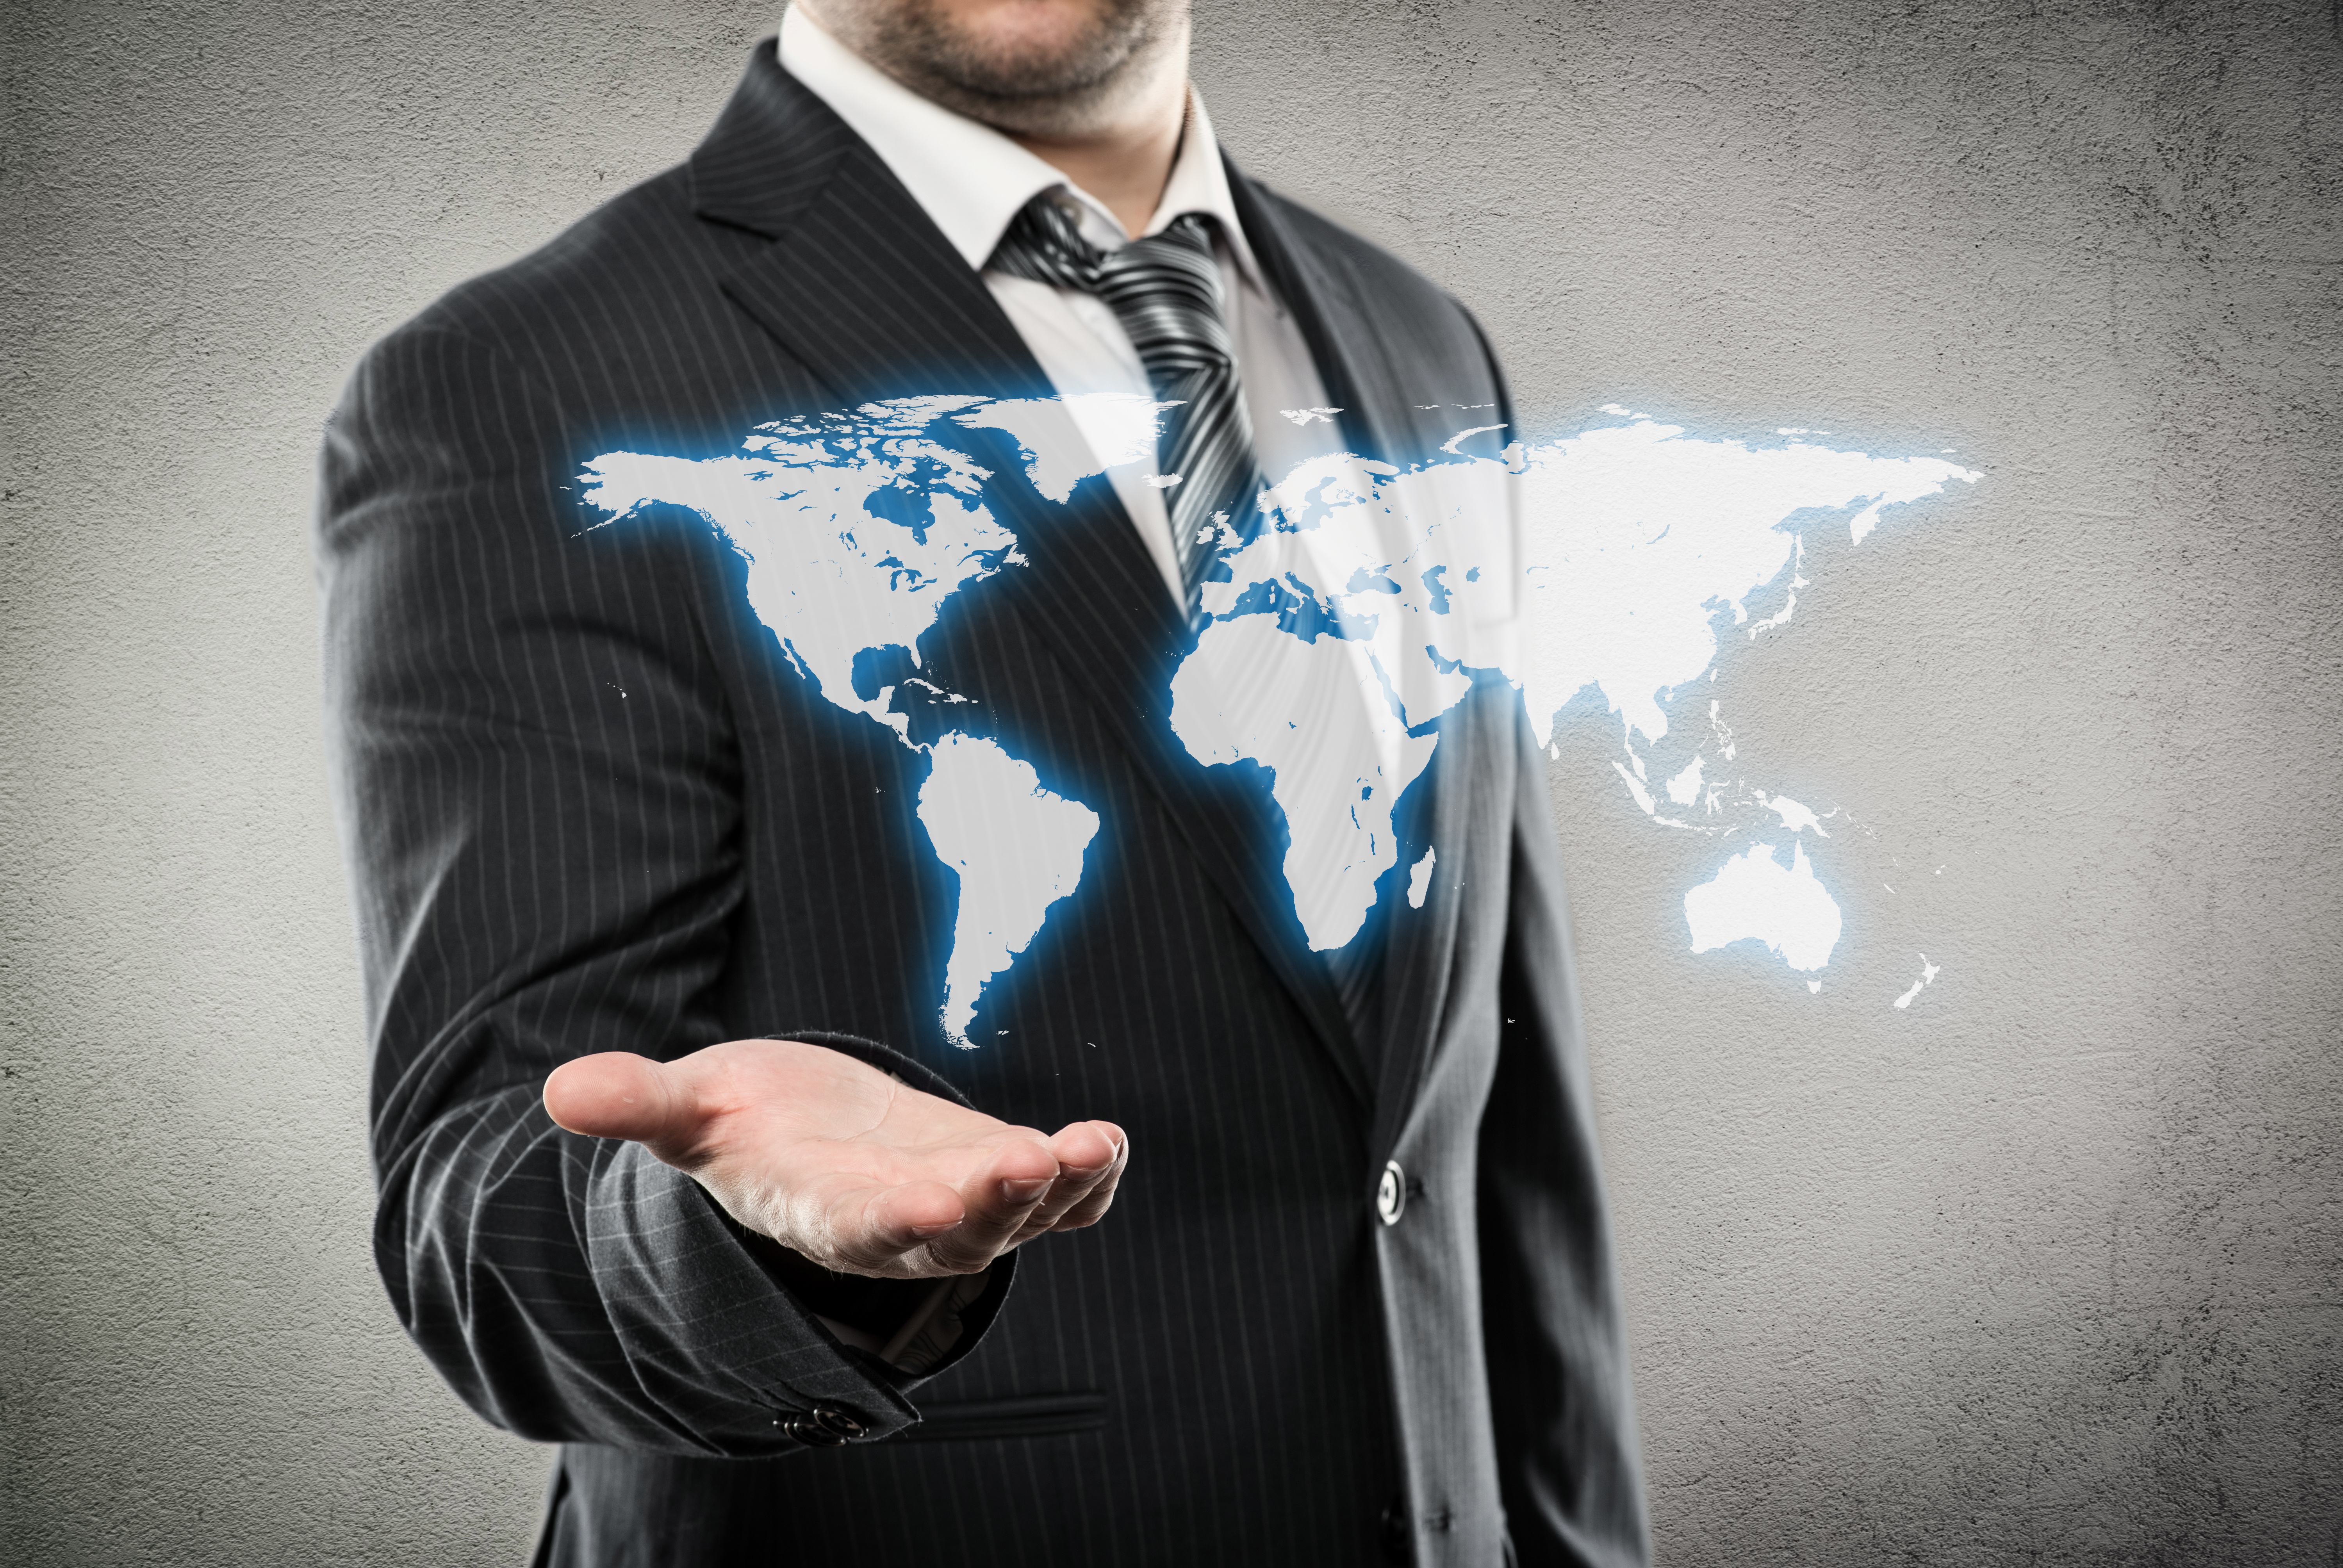 Person in pinstriped suit and tie "holding" hologram-like image of a world map.